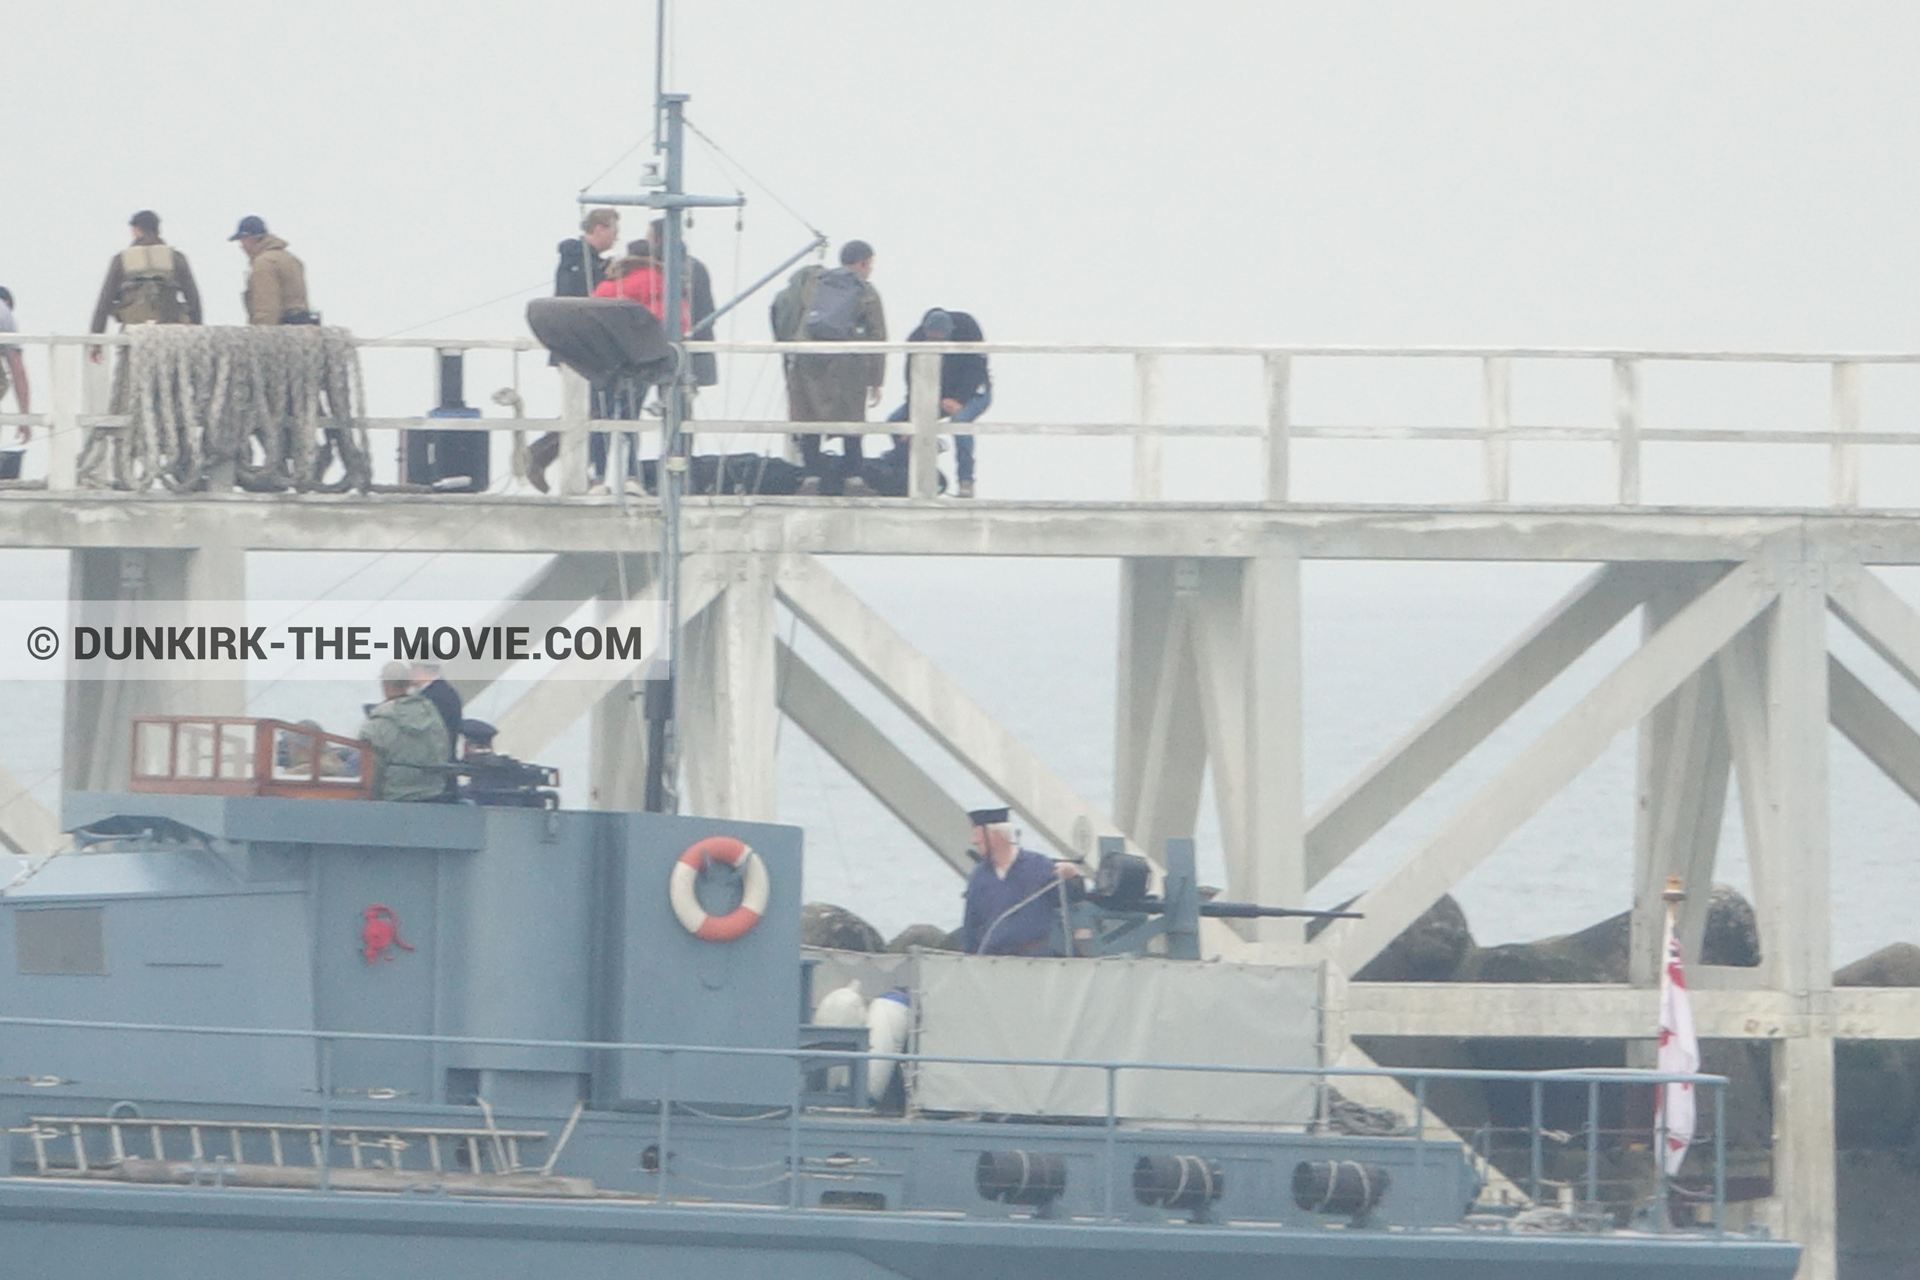 Picture with actor, boat, grey sky, HMS Medusa - ML1387, EST pier, technical team,  from behind the scene of the Dunkirk movie by Nolan